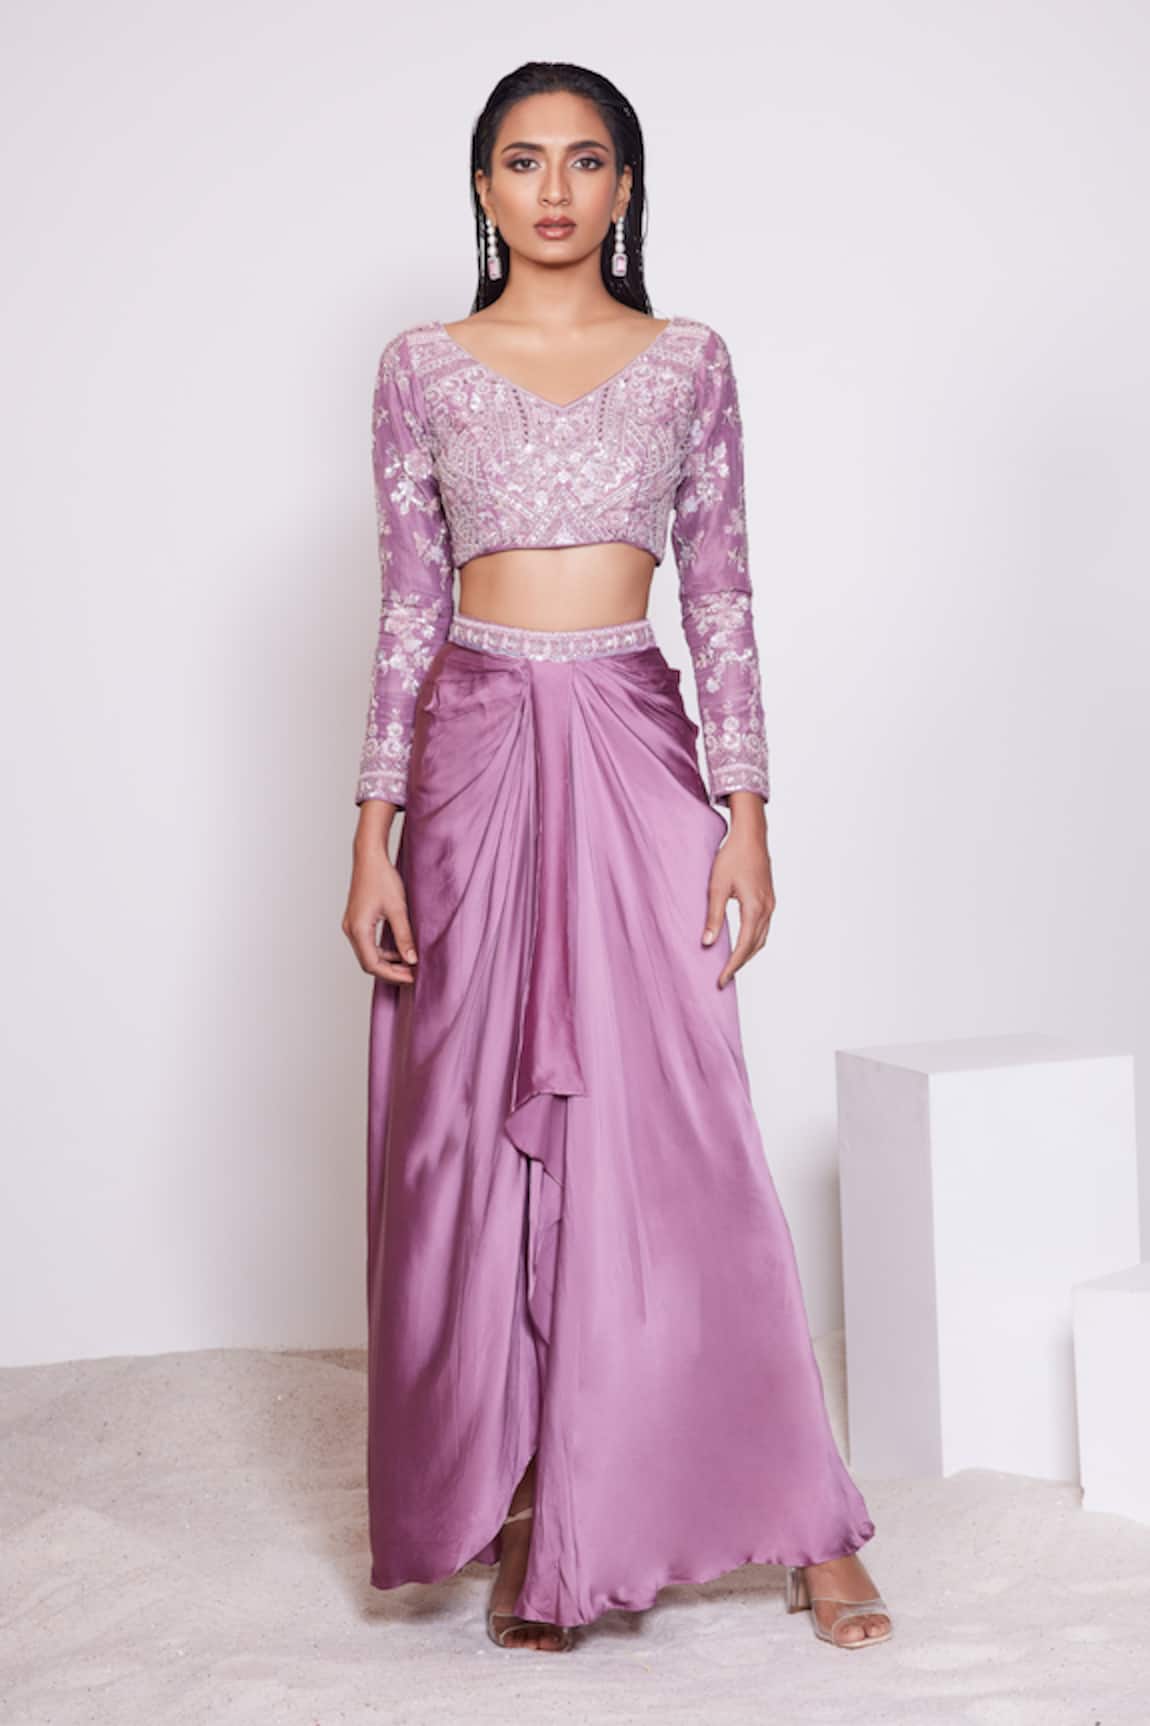 PANIHARI Floral Embroidered Blouse With Draped Skirt